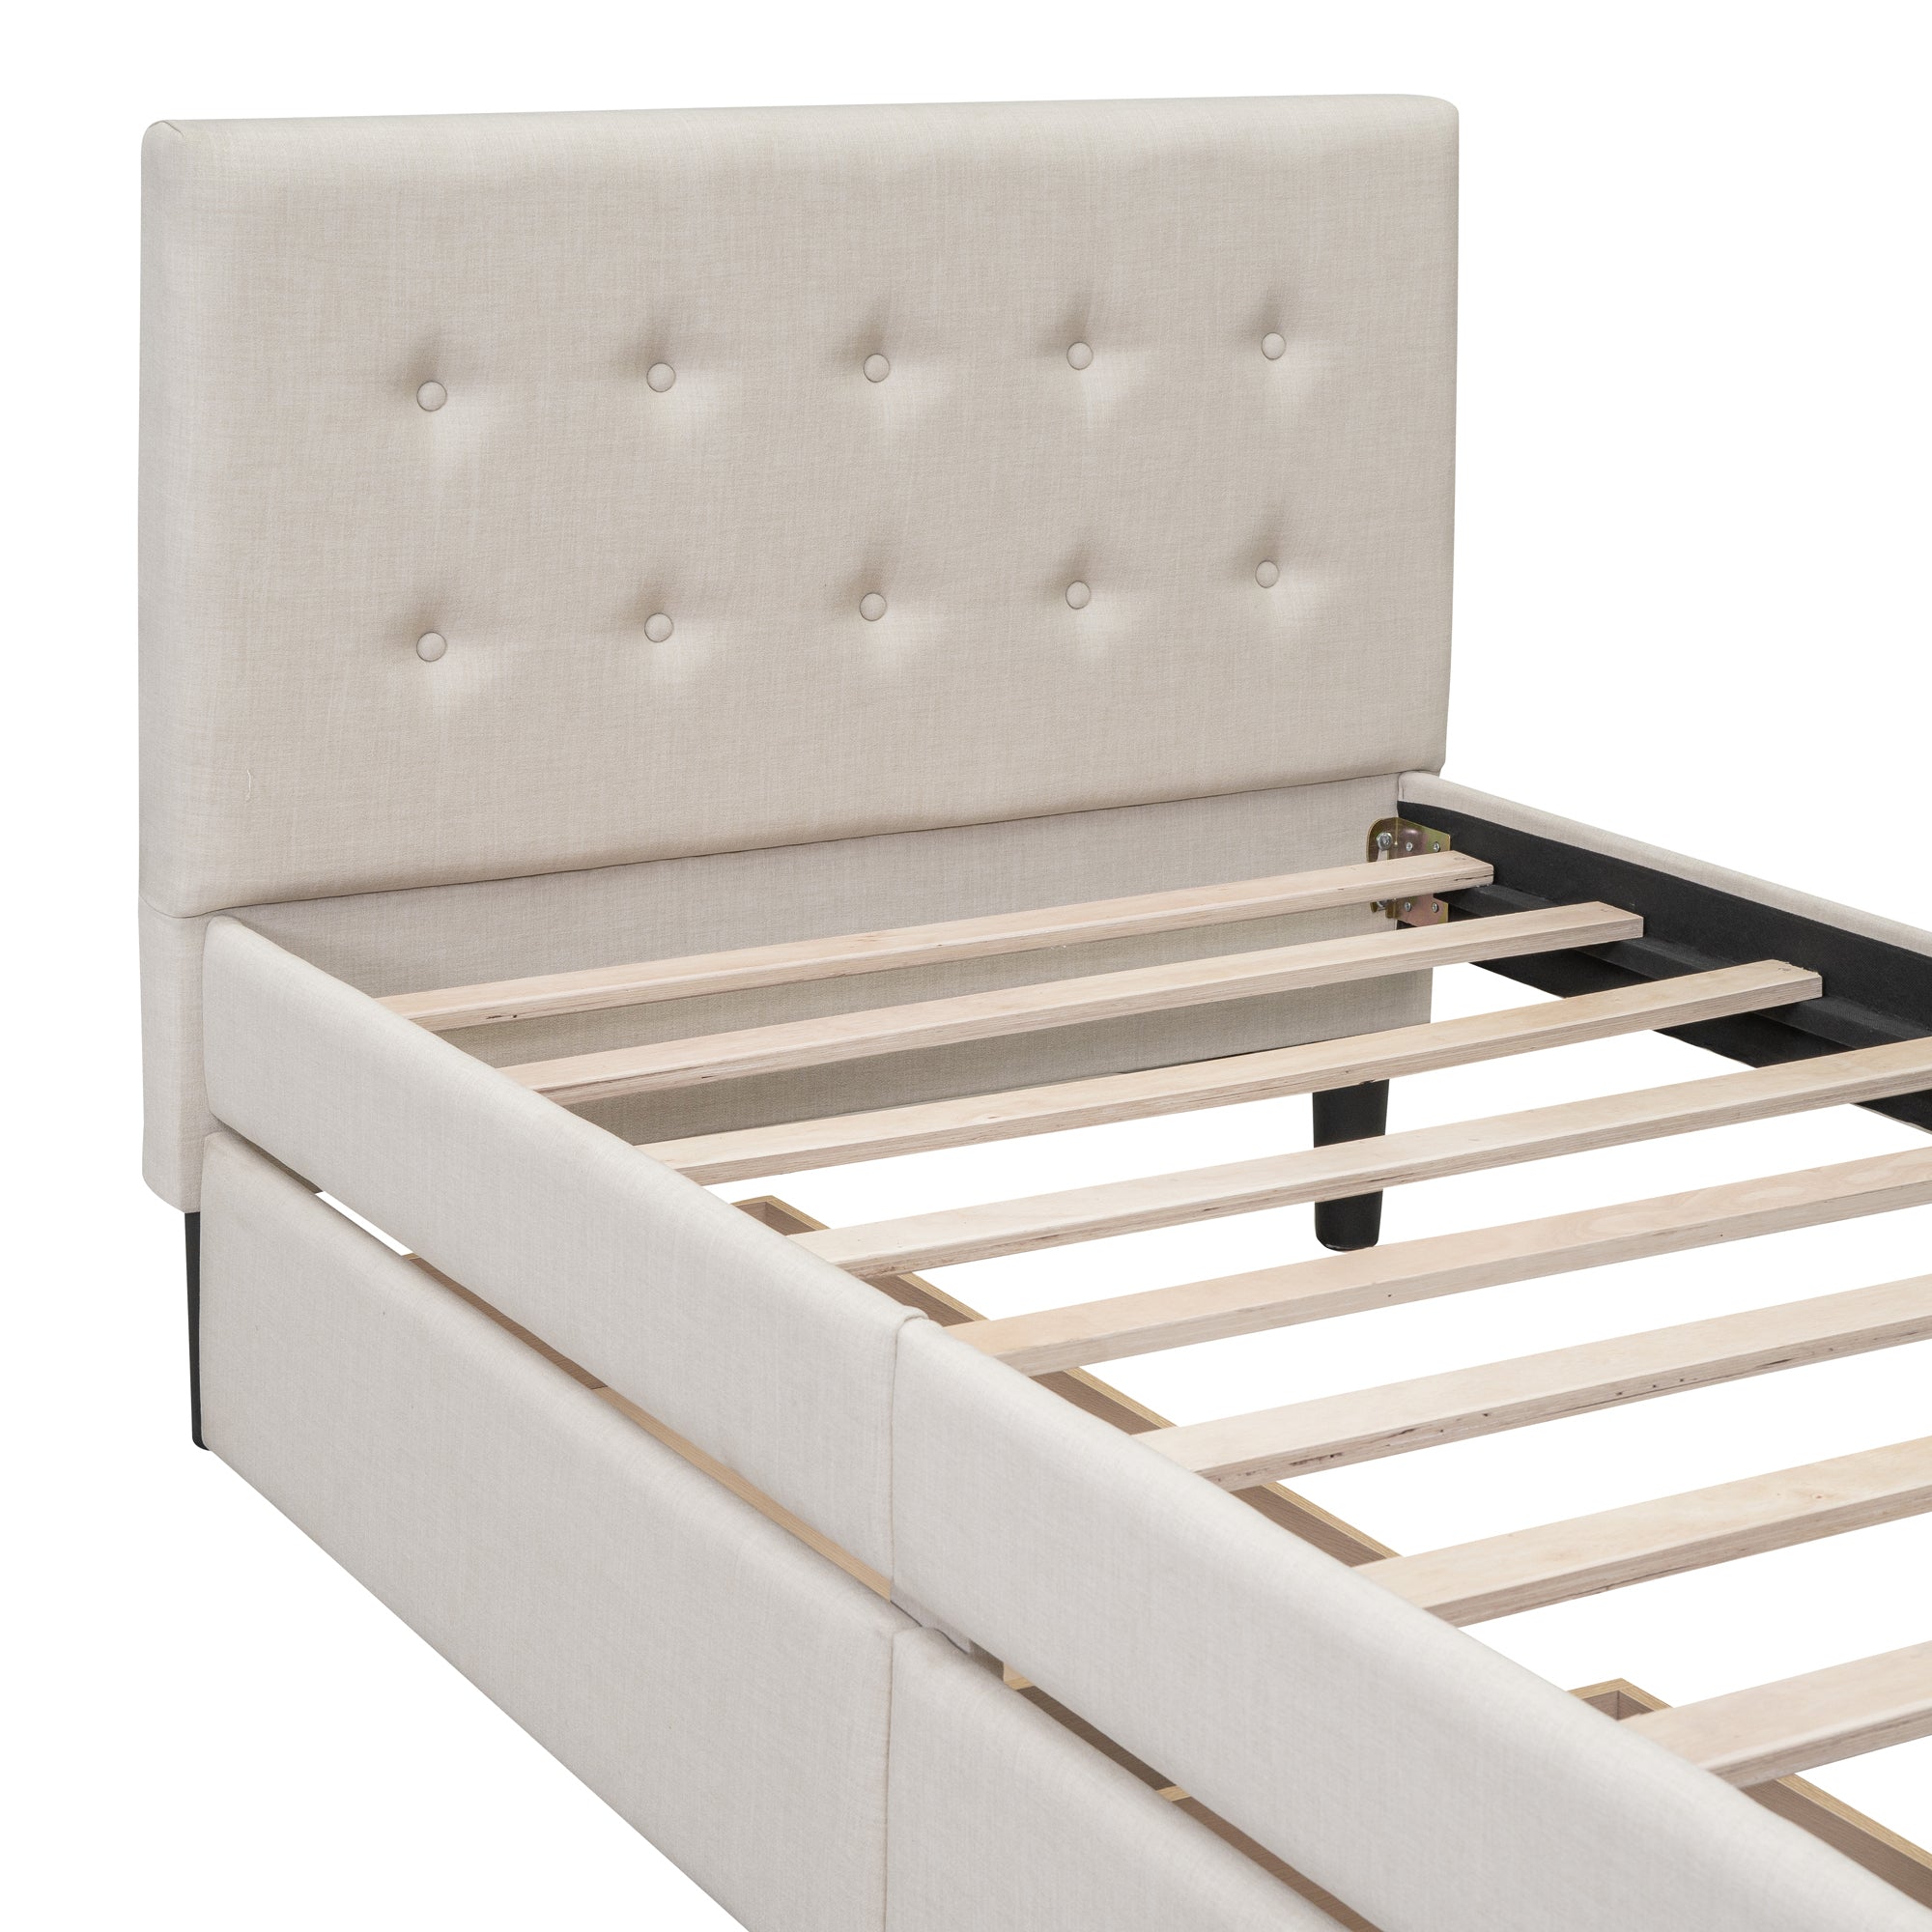 Twin Size Upholstered Platform Bed with 2 Drawers - Beige